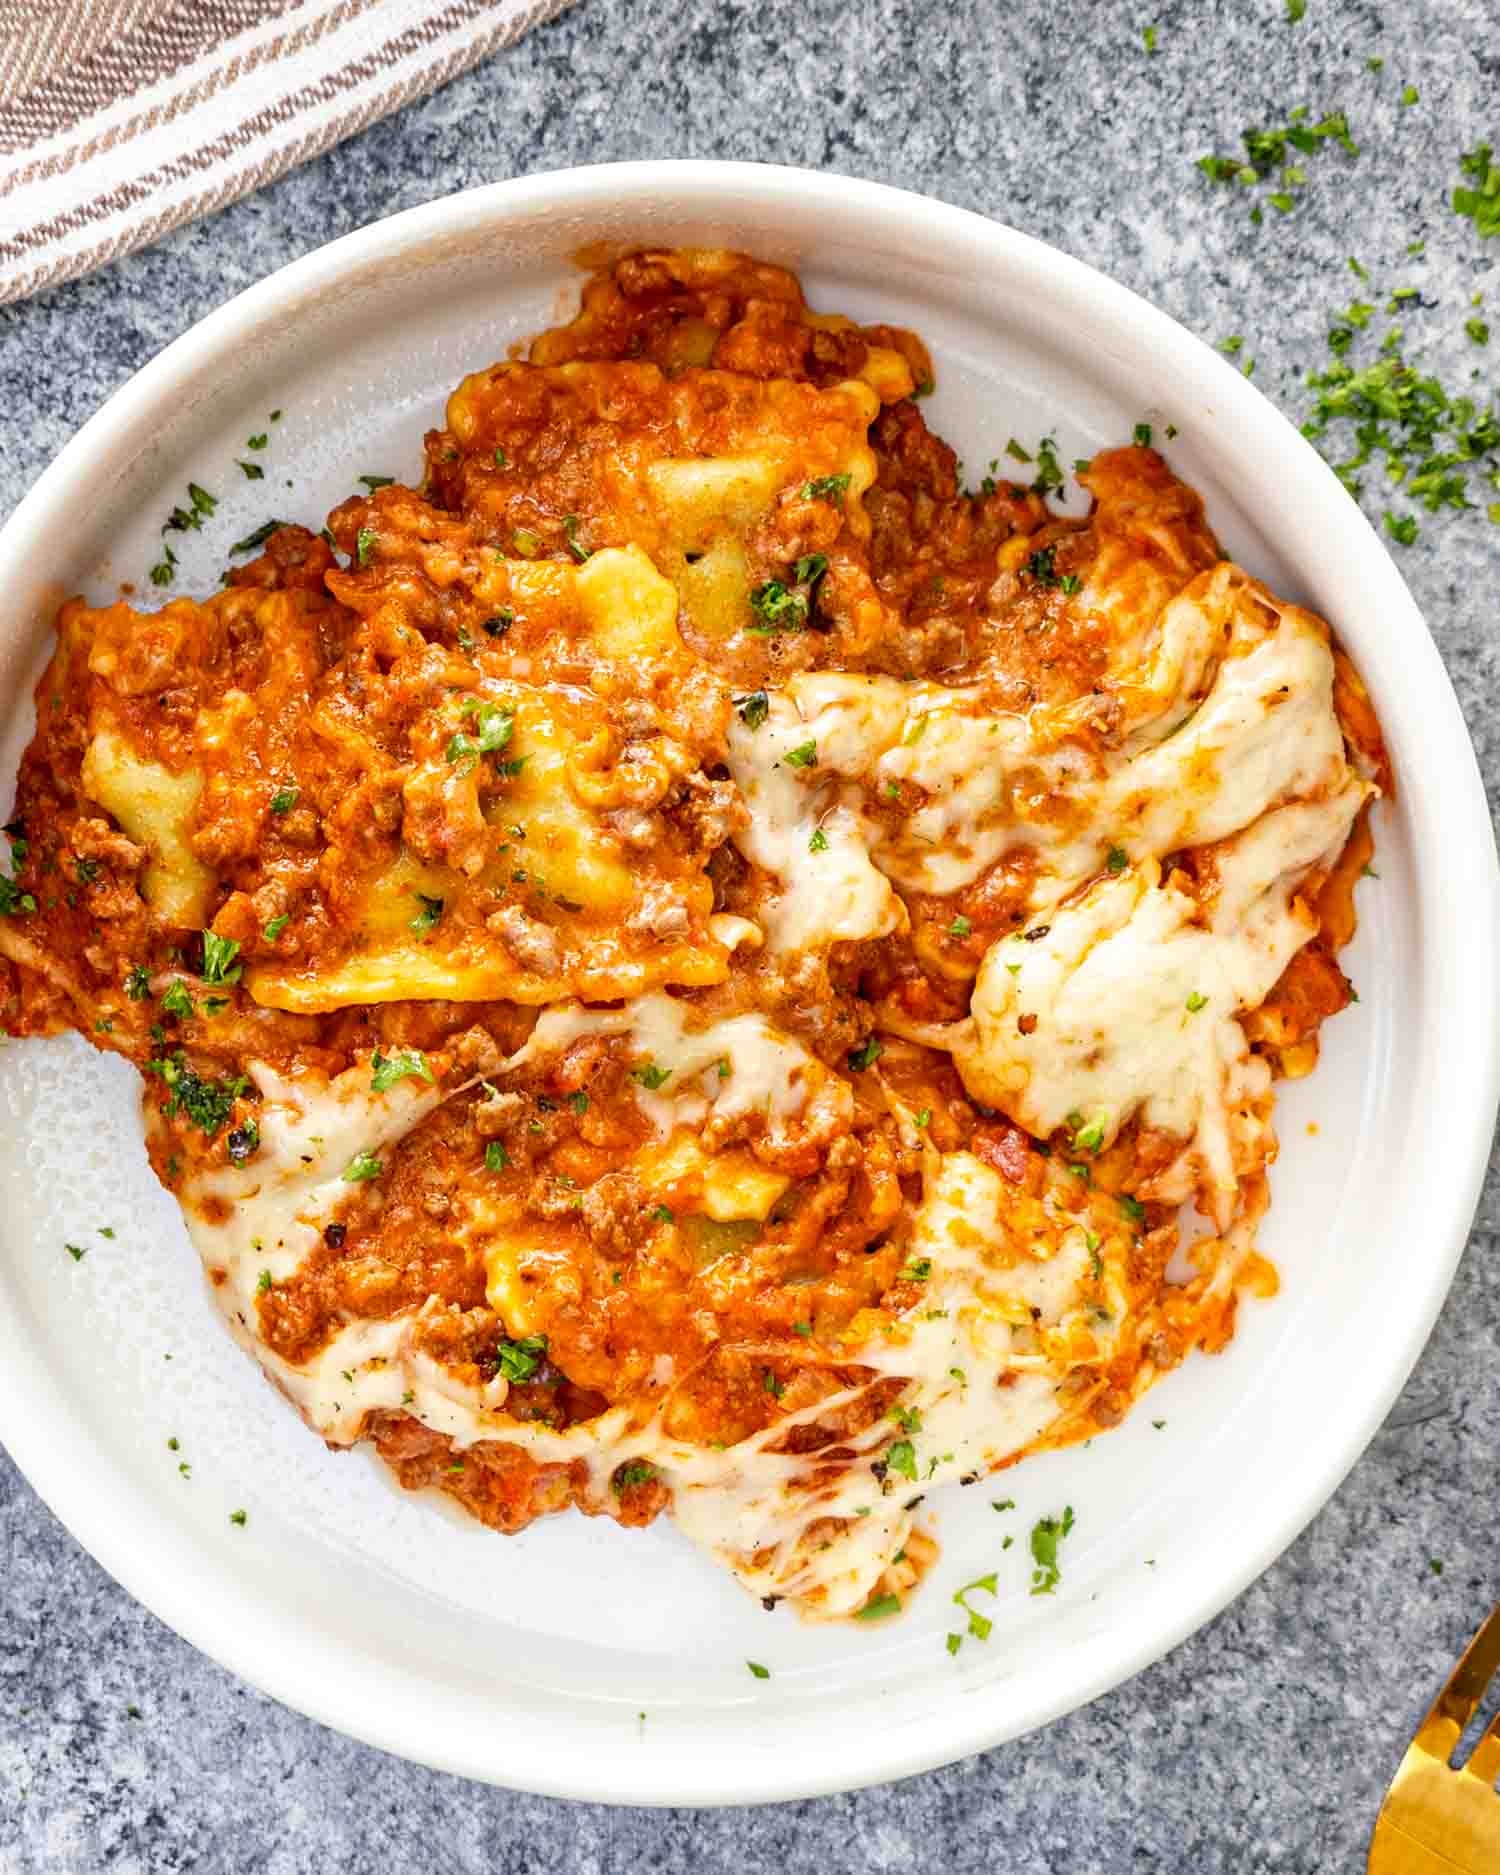 a serving of baked ravioli in a white bowl garnished with a bit of parsley.